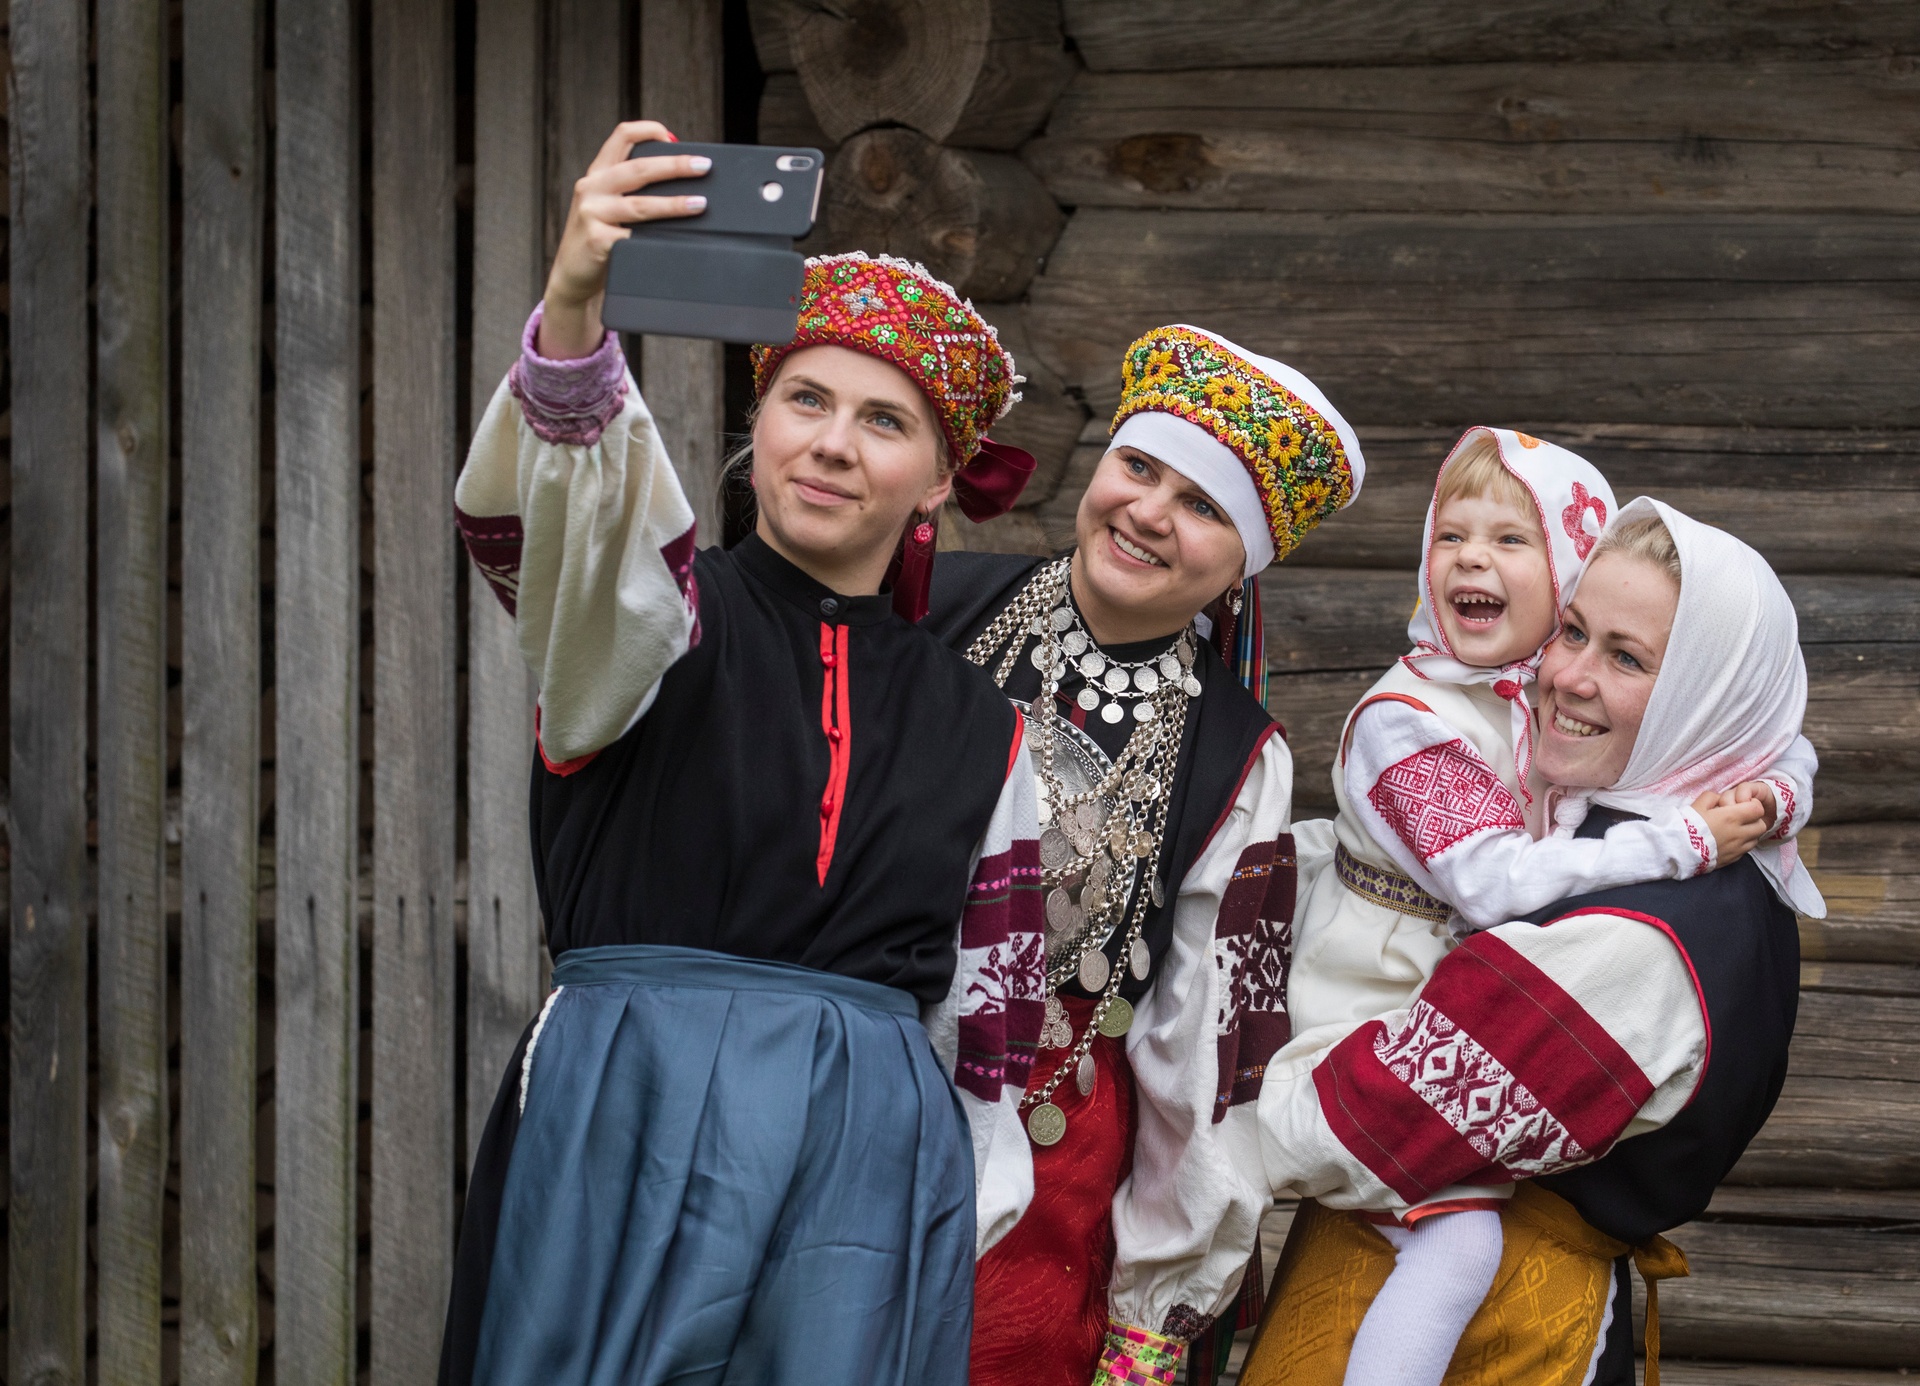 Women in Setomaa national clothes making selfie